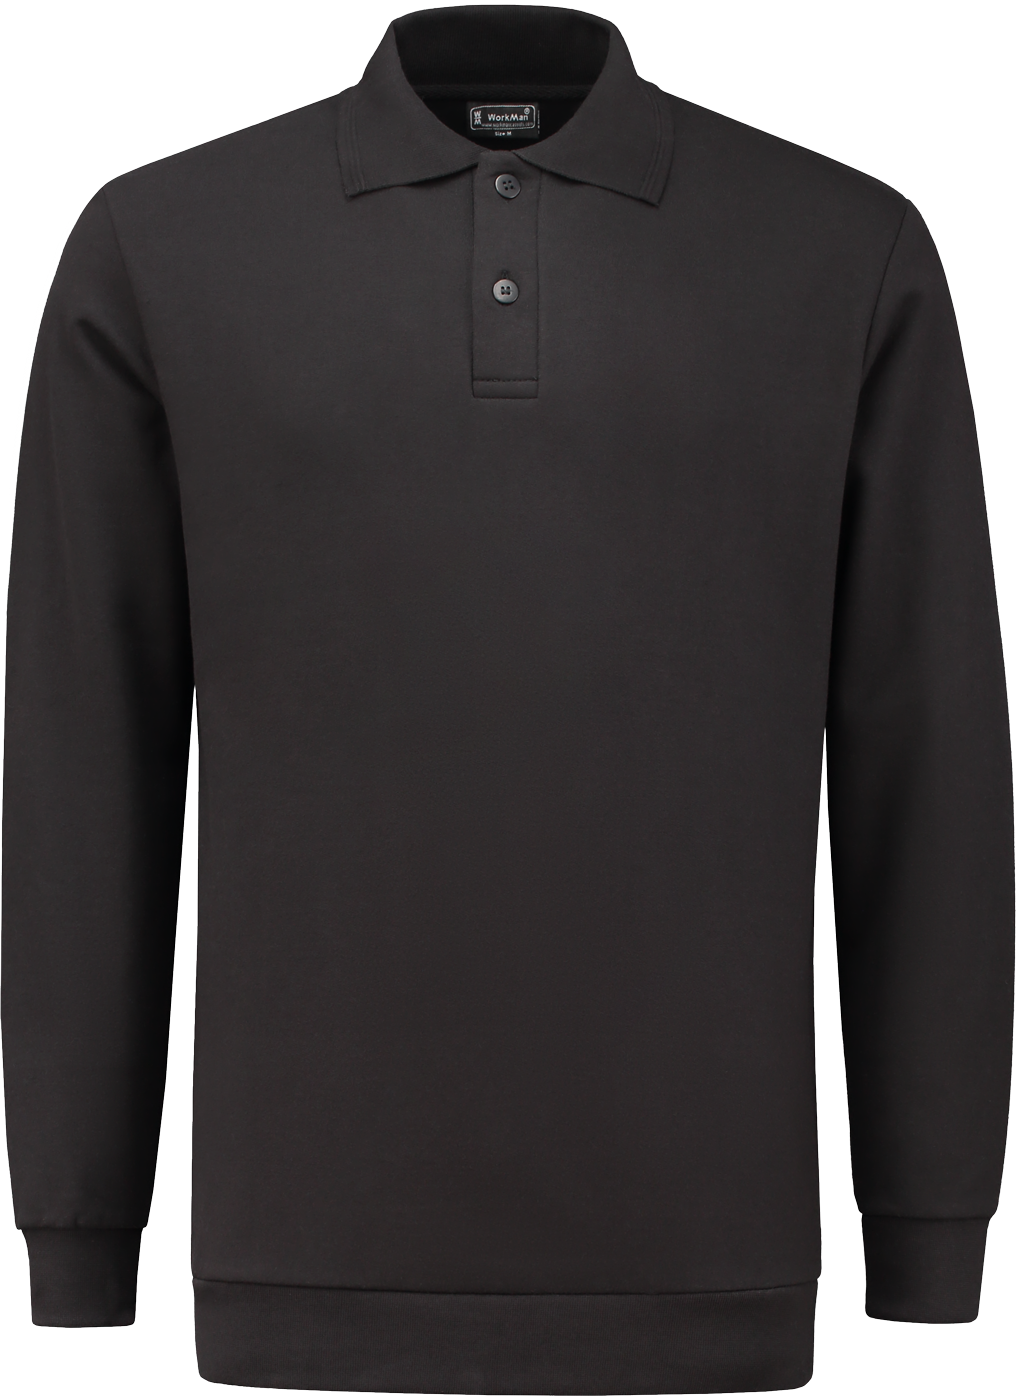 10.6.9306.01 9306 Polosweater Outfitters Black Rib Board S